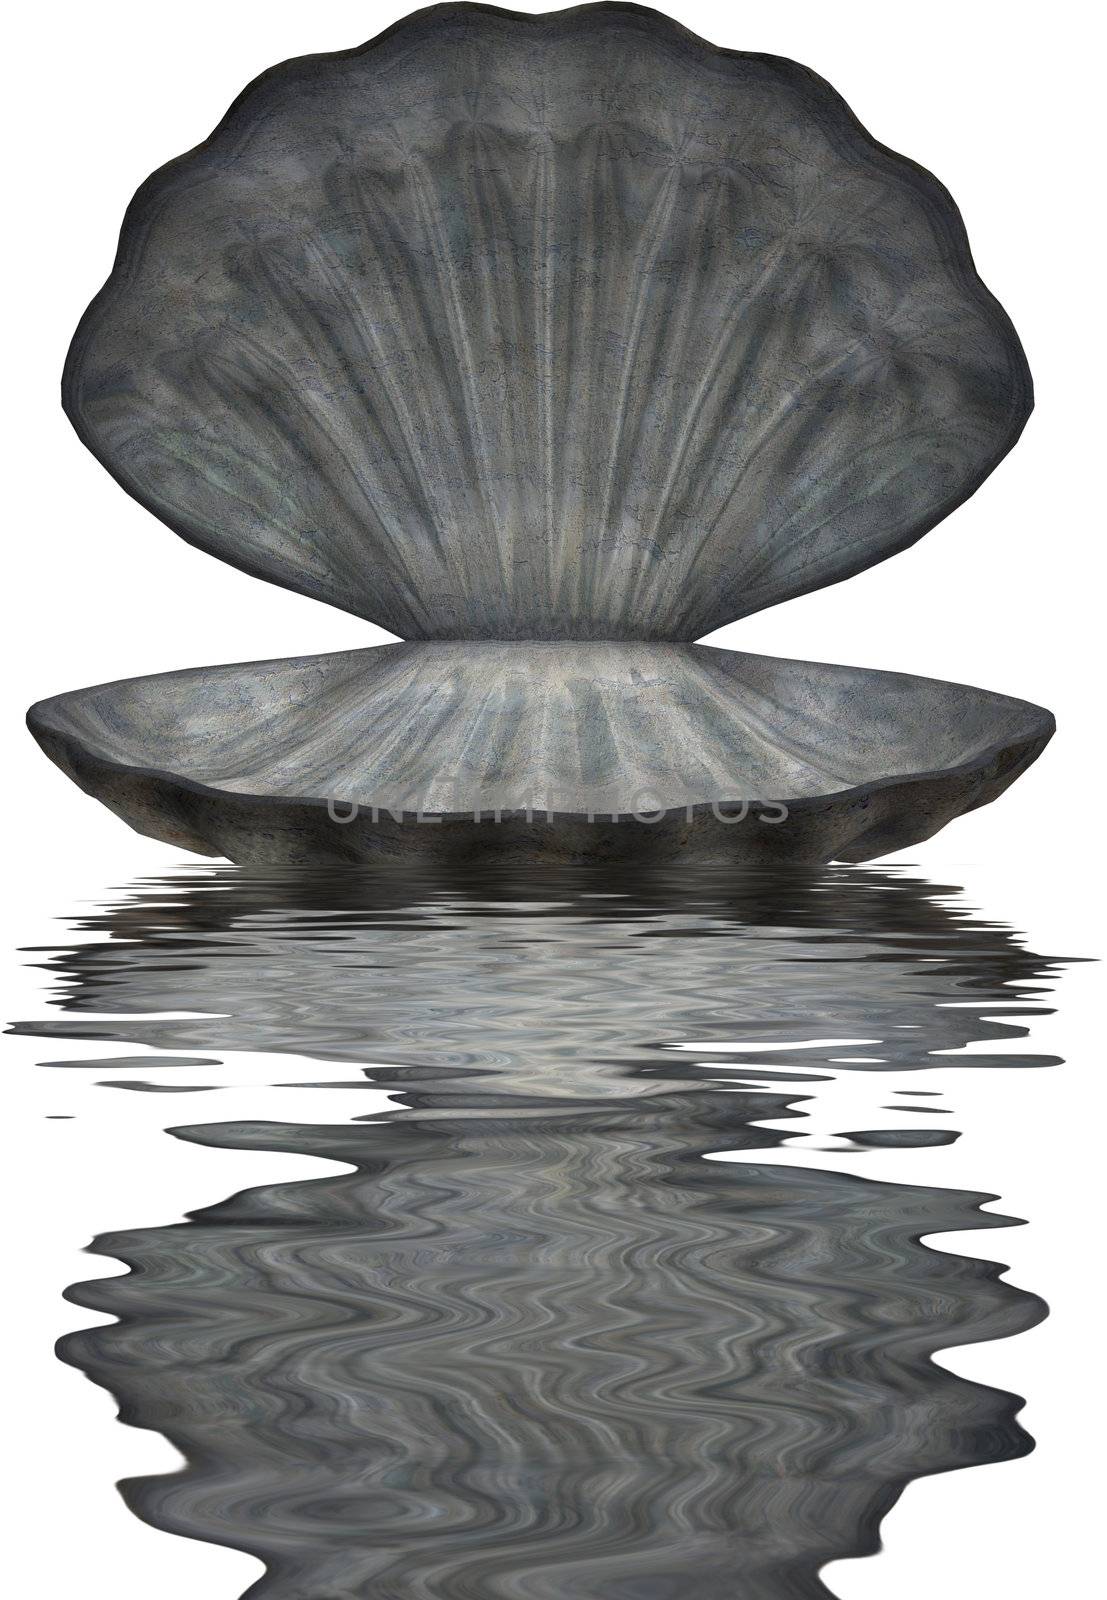 Large Sea Shell In Water by kathygold